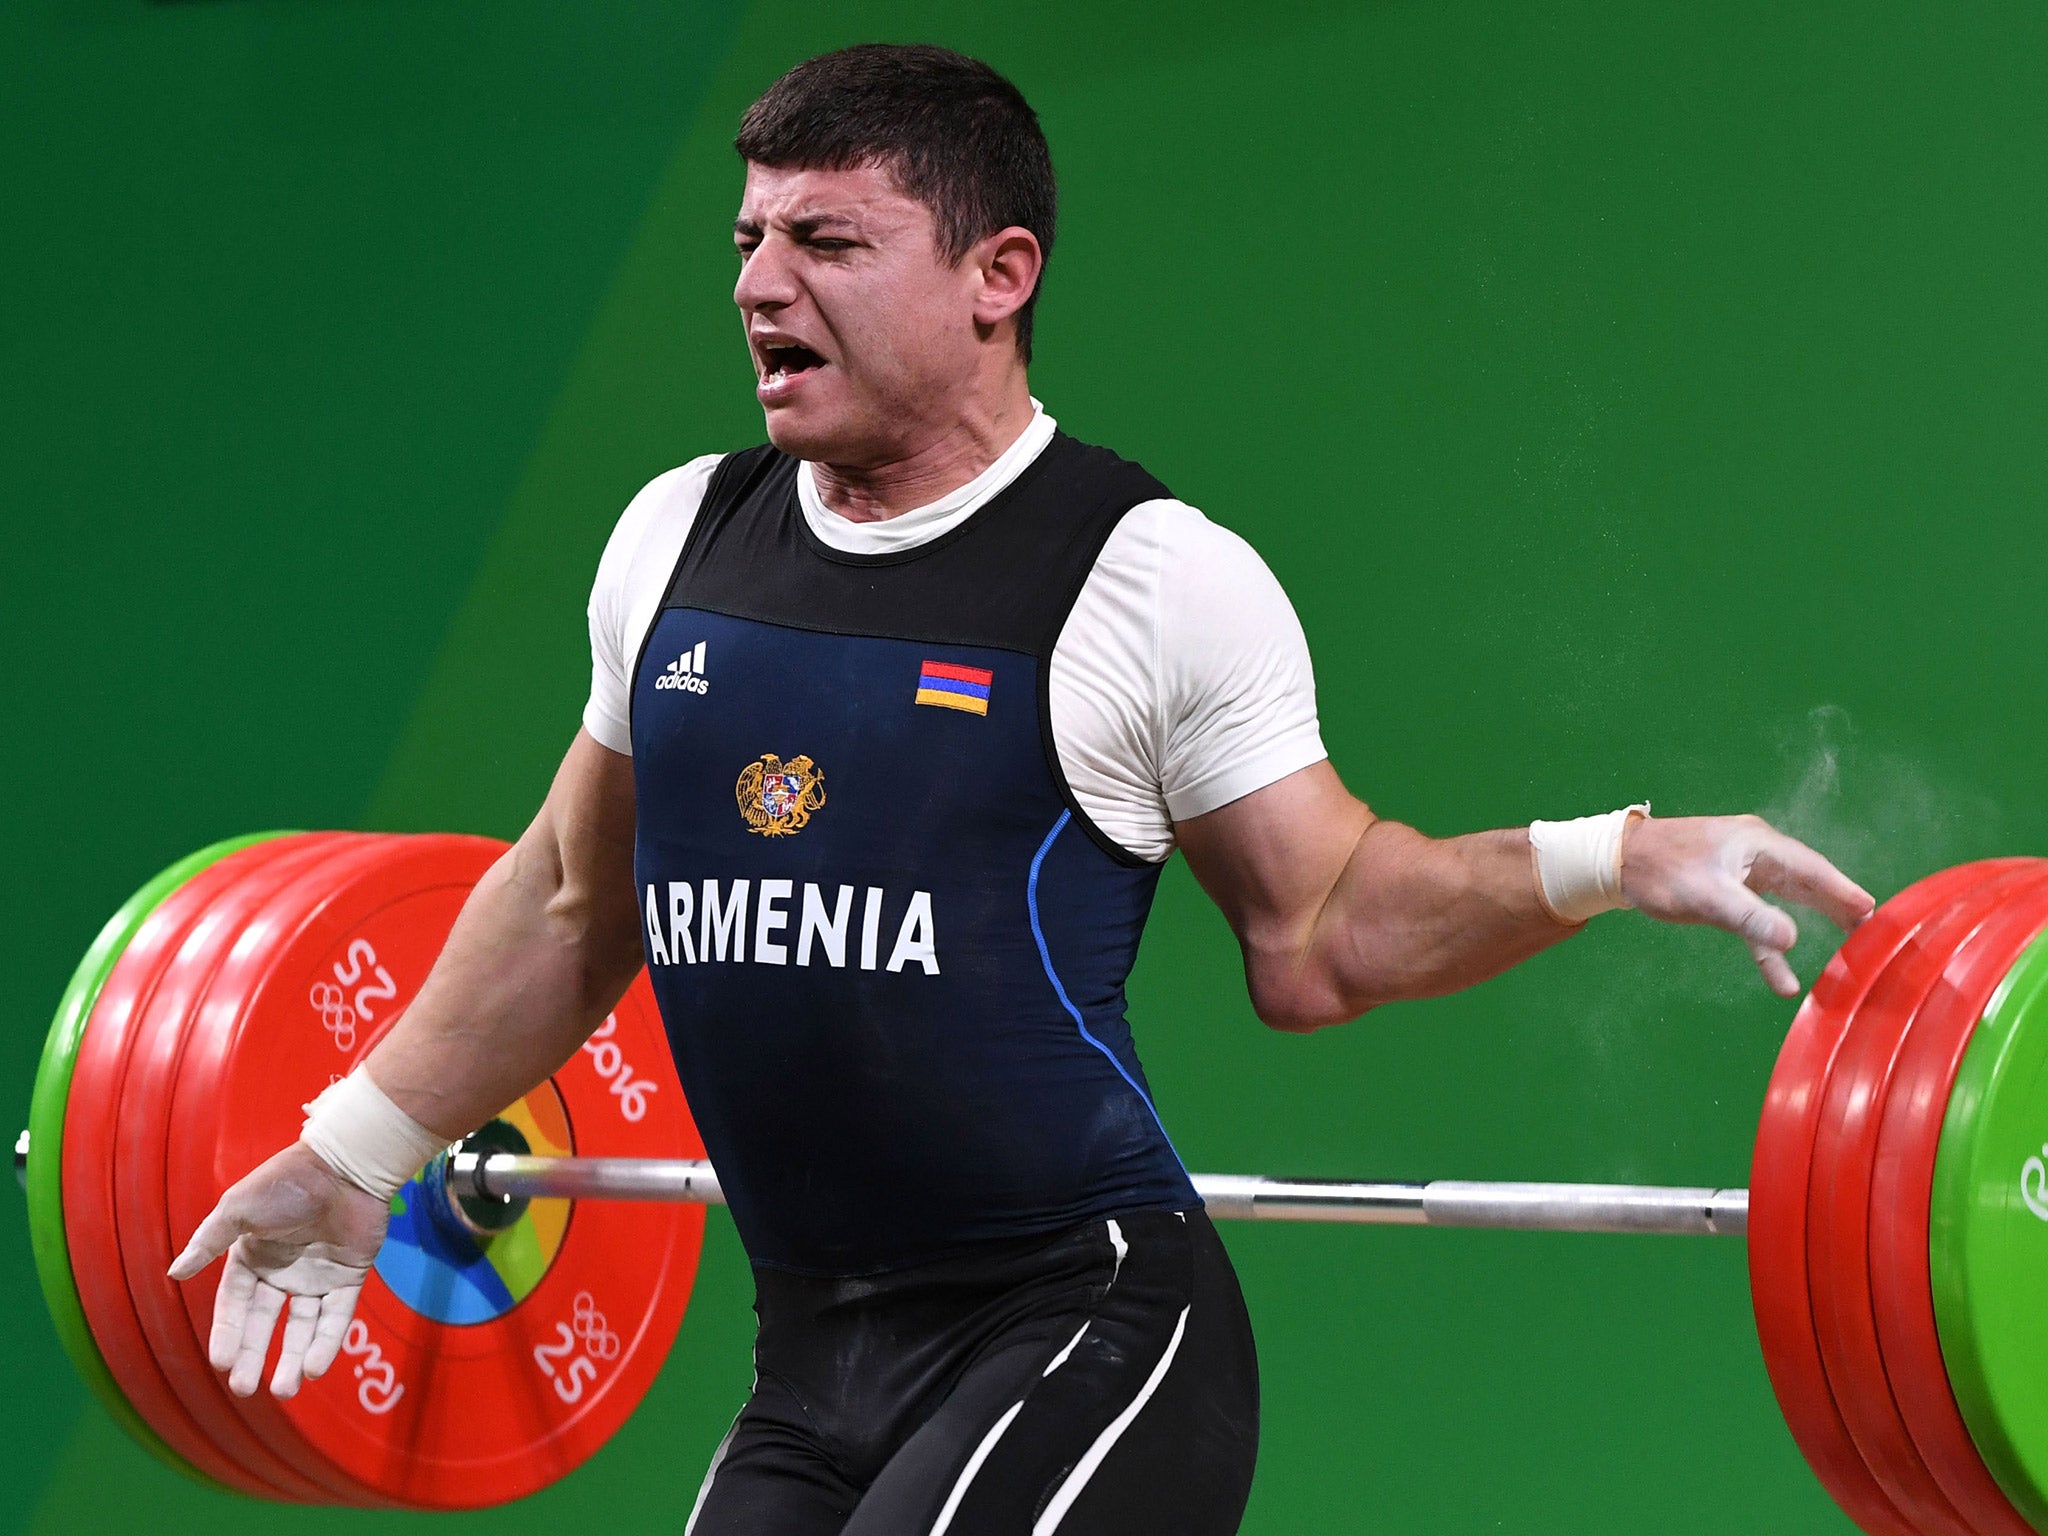 Olympic Weightlifting 2016: Medal Winners, Scores and Sunday's